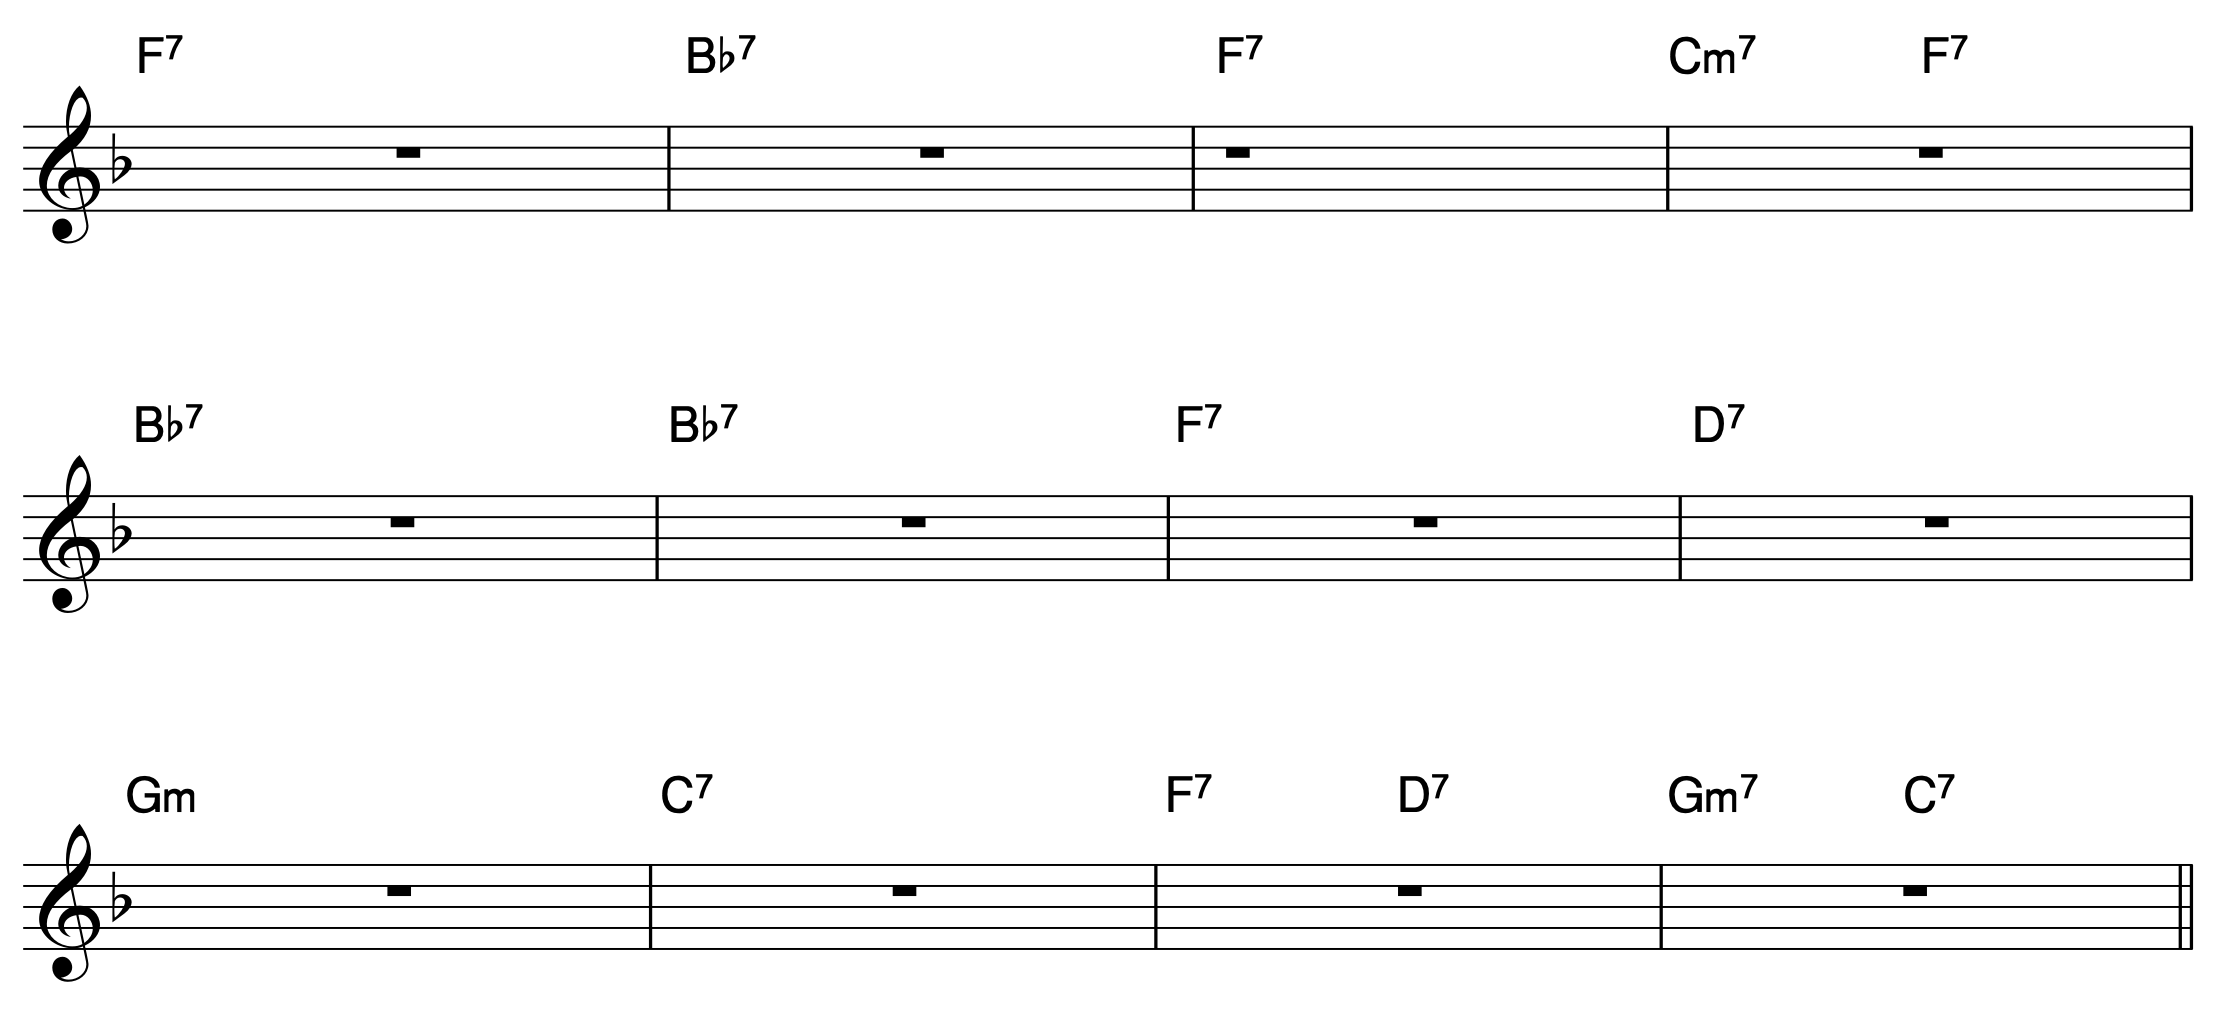 12 bar blues in F with II-V's and turnarounds.